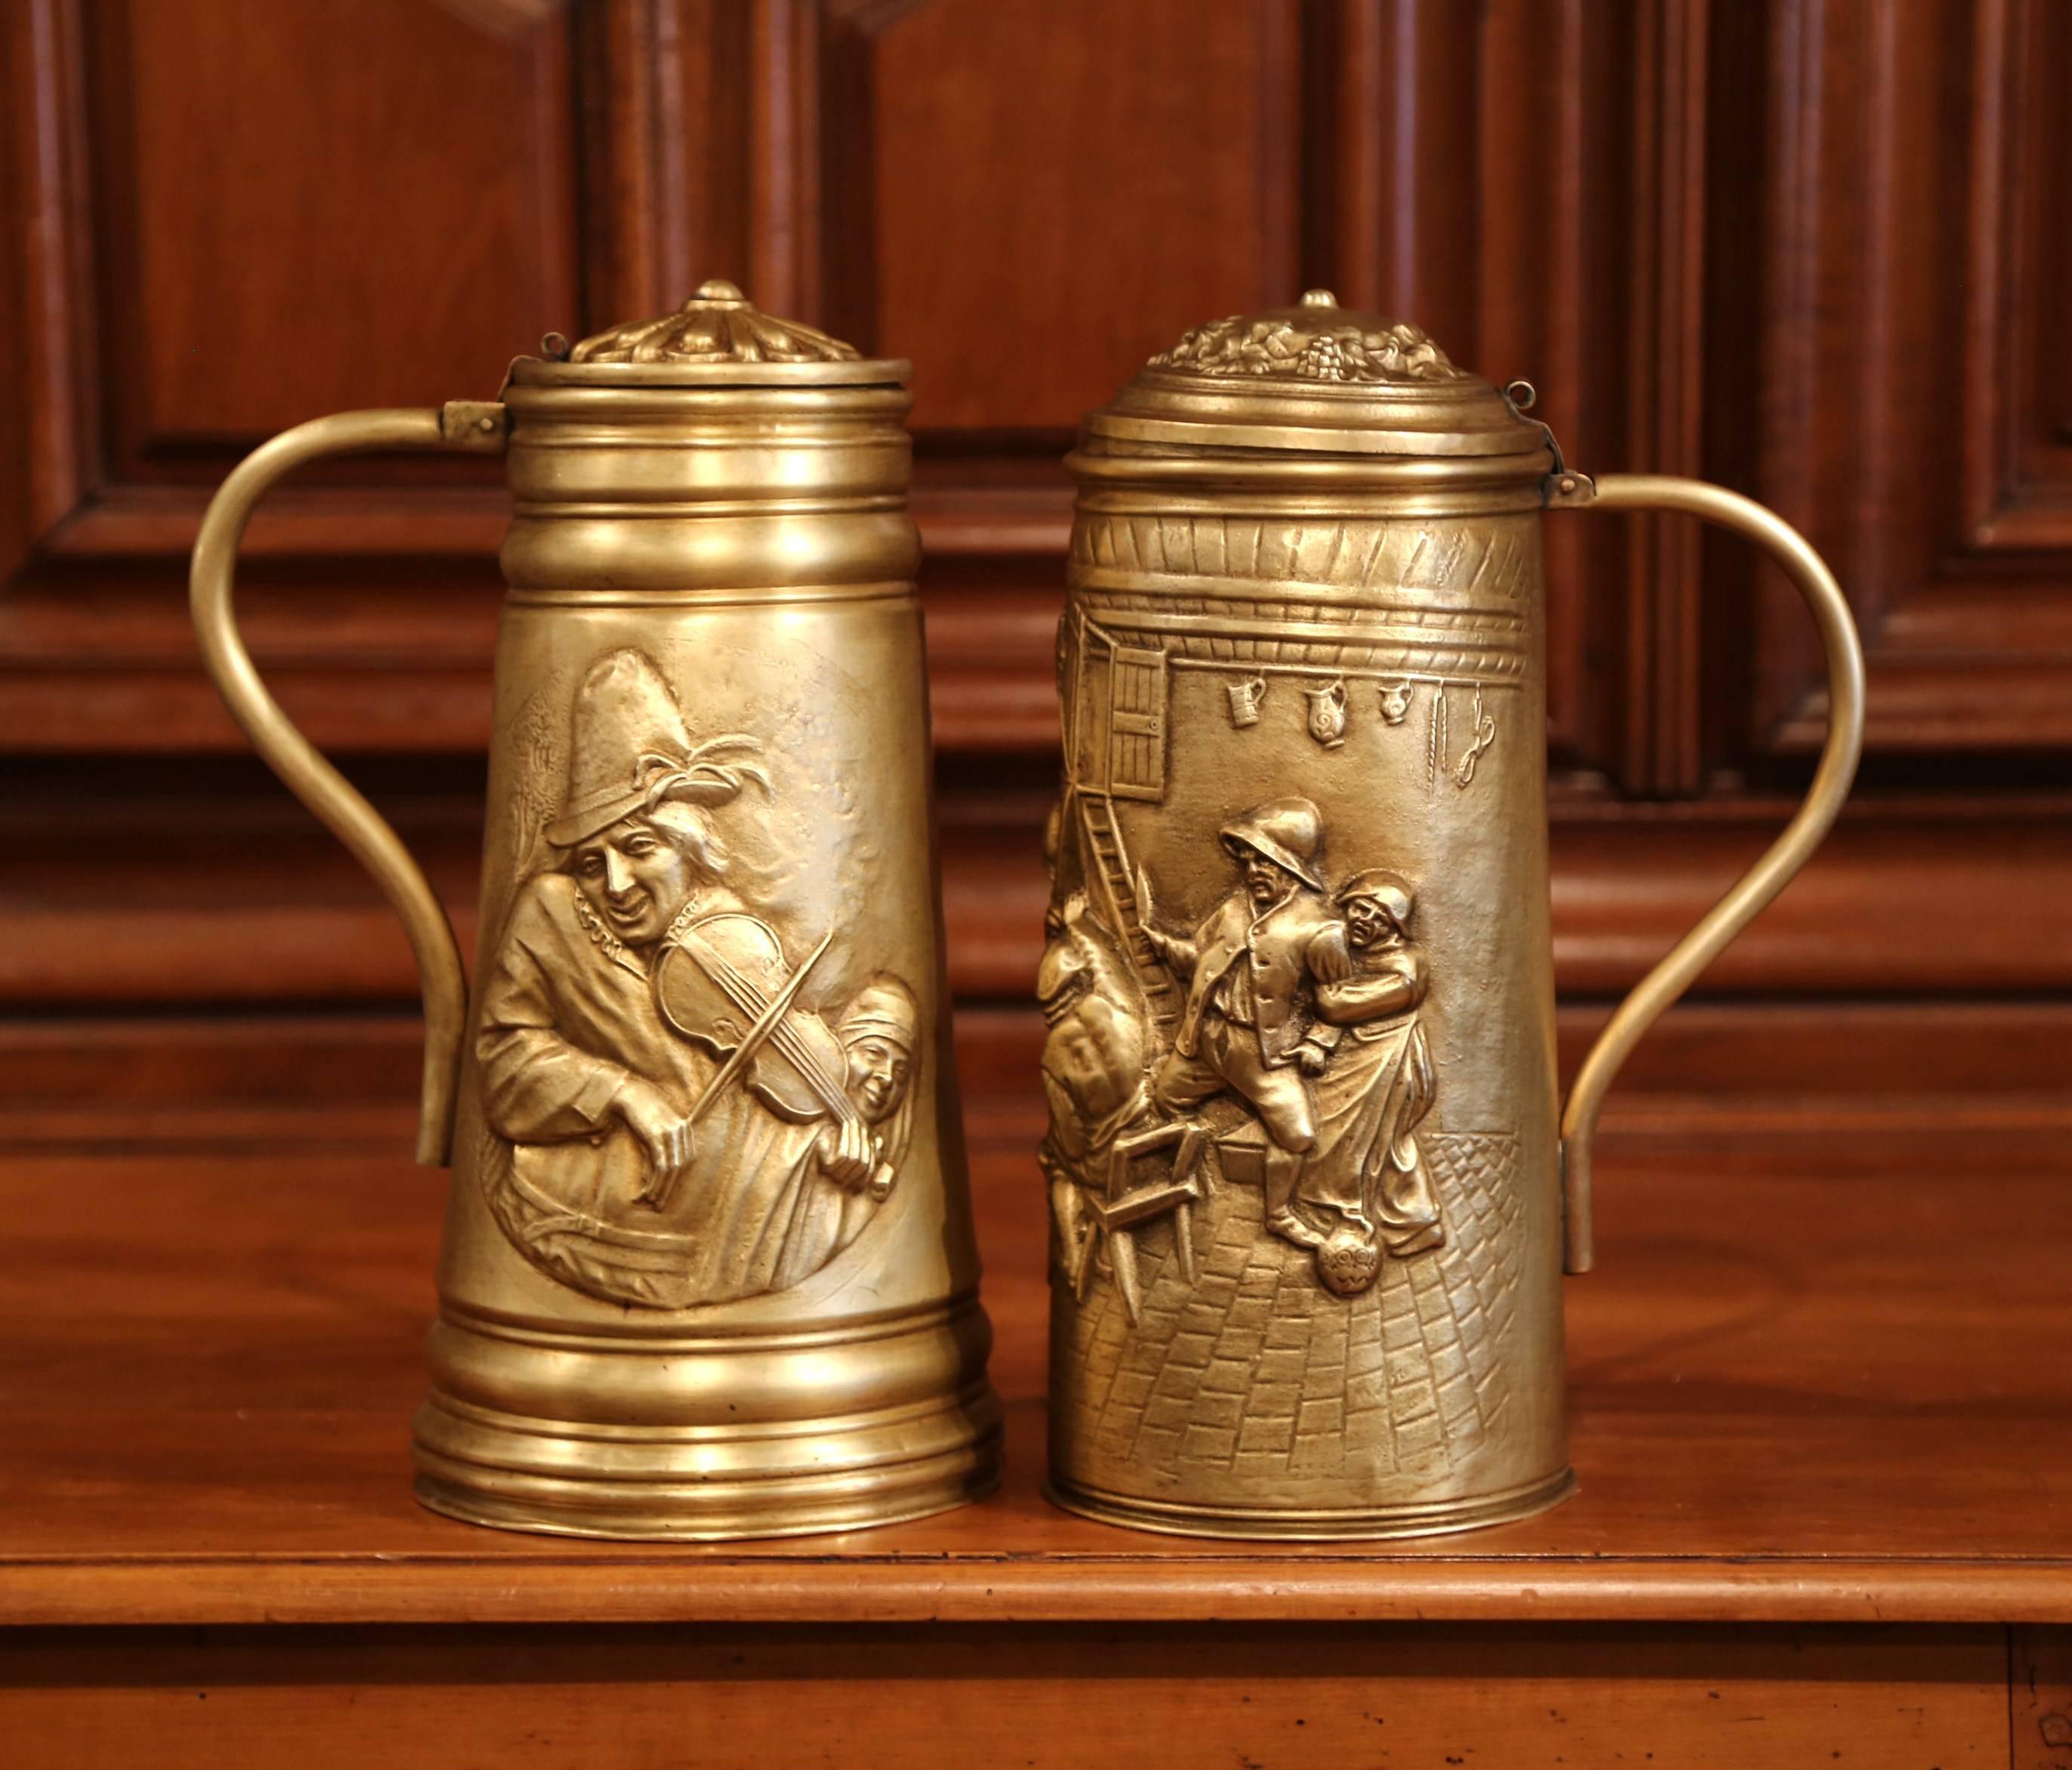 Repoussé Pair of 19th Century Belgium Brass Beer Pitchers with Lid and Repousse Decor